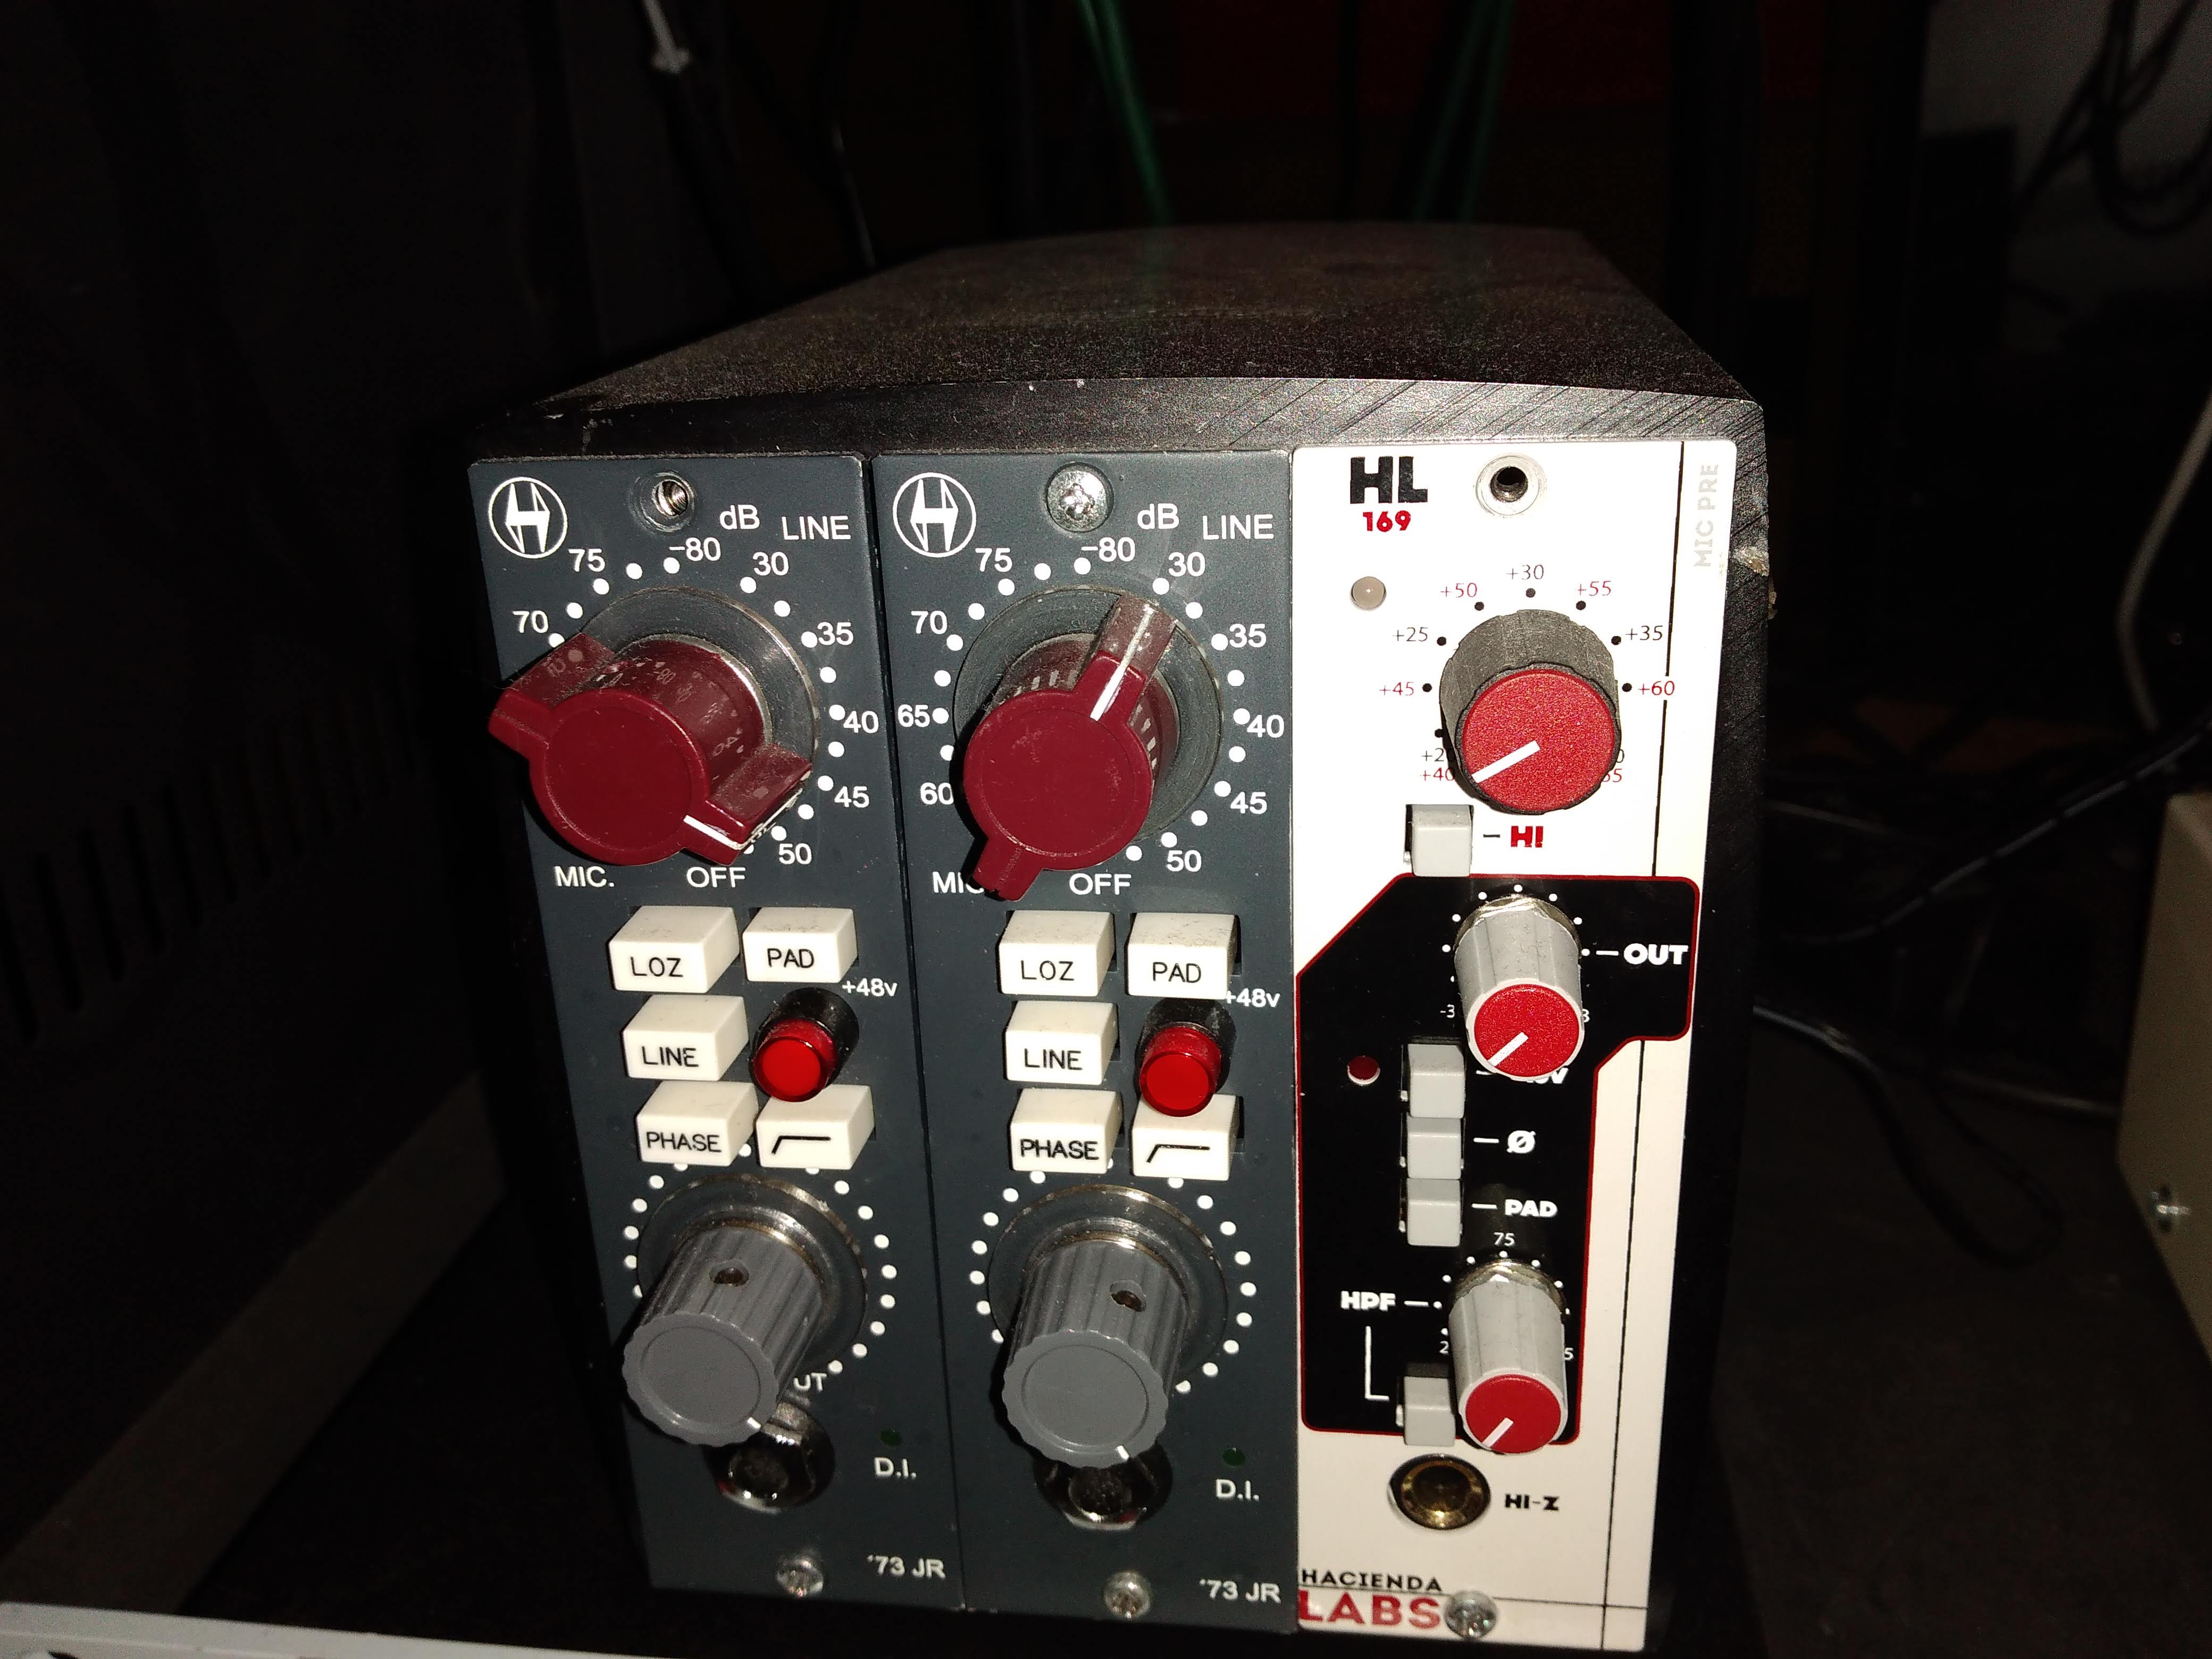 neve preamp 1073 torrent